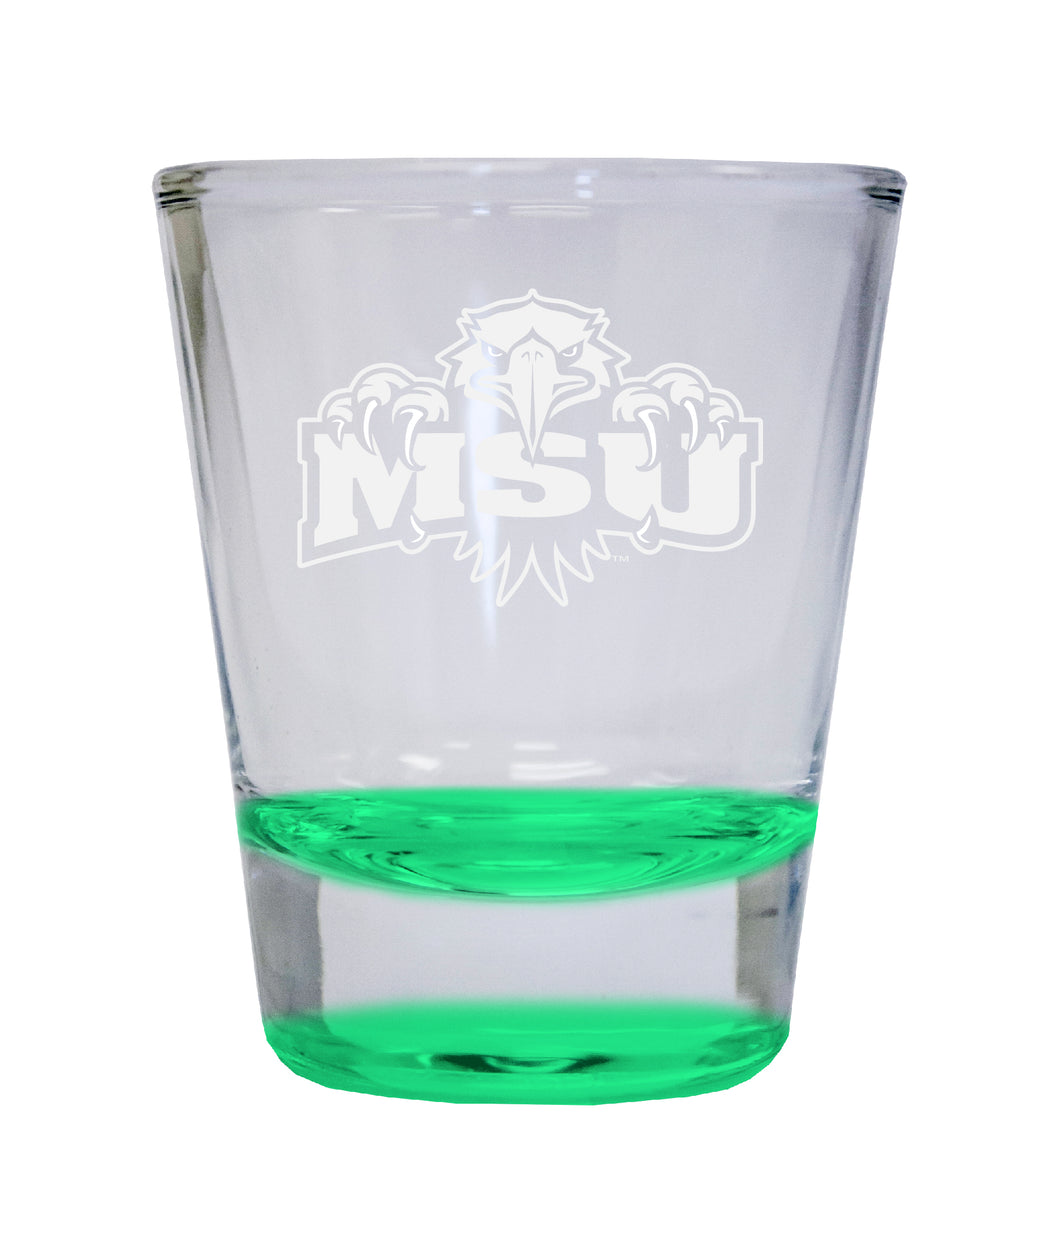 Morehead State University Etched Round Shot Glass 2 oz Green